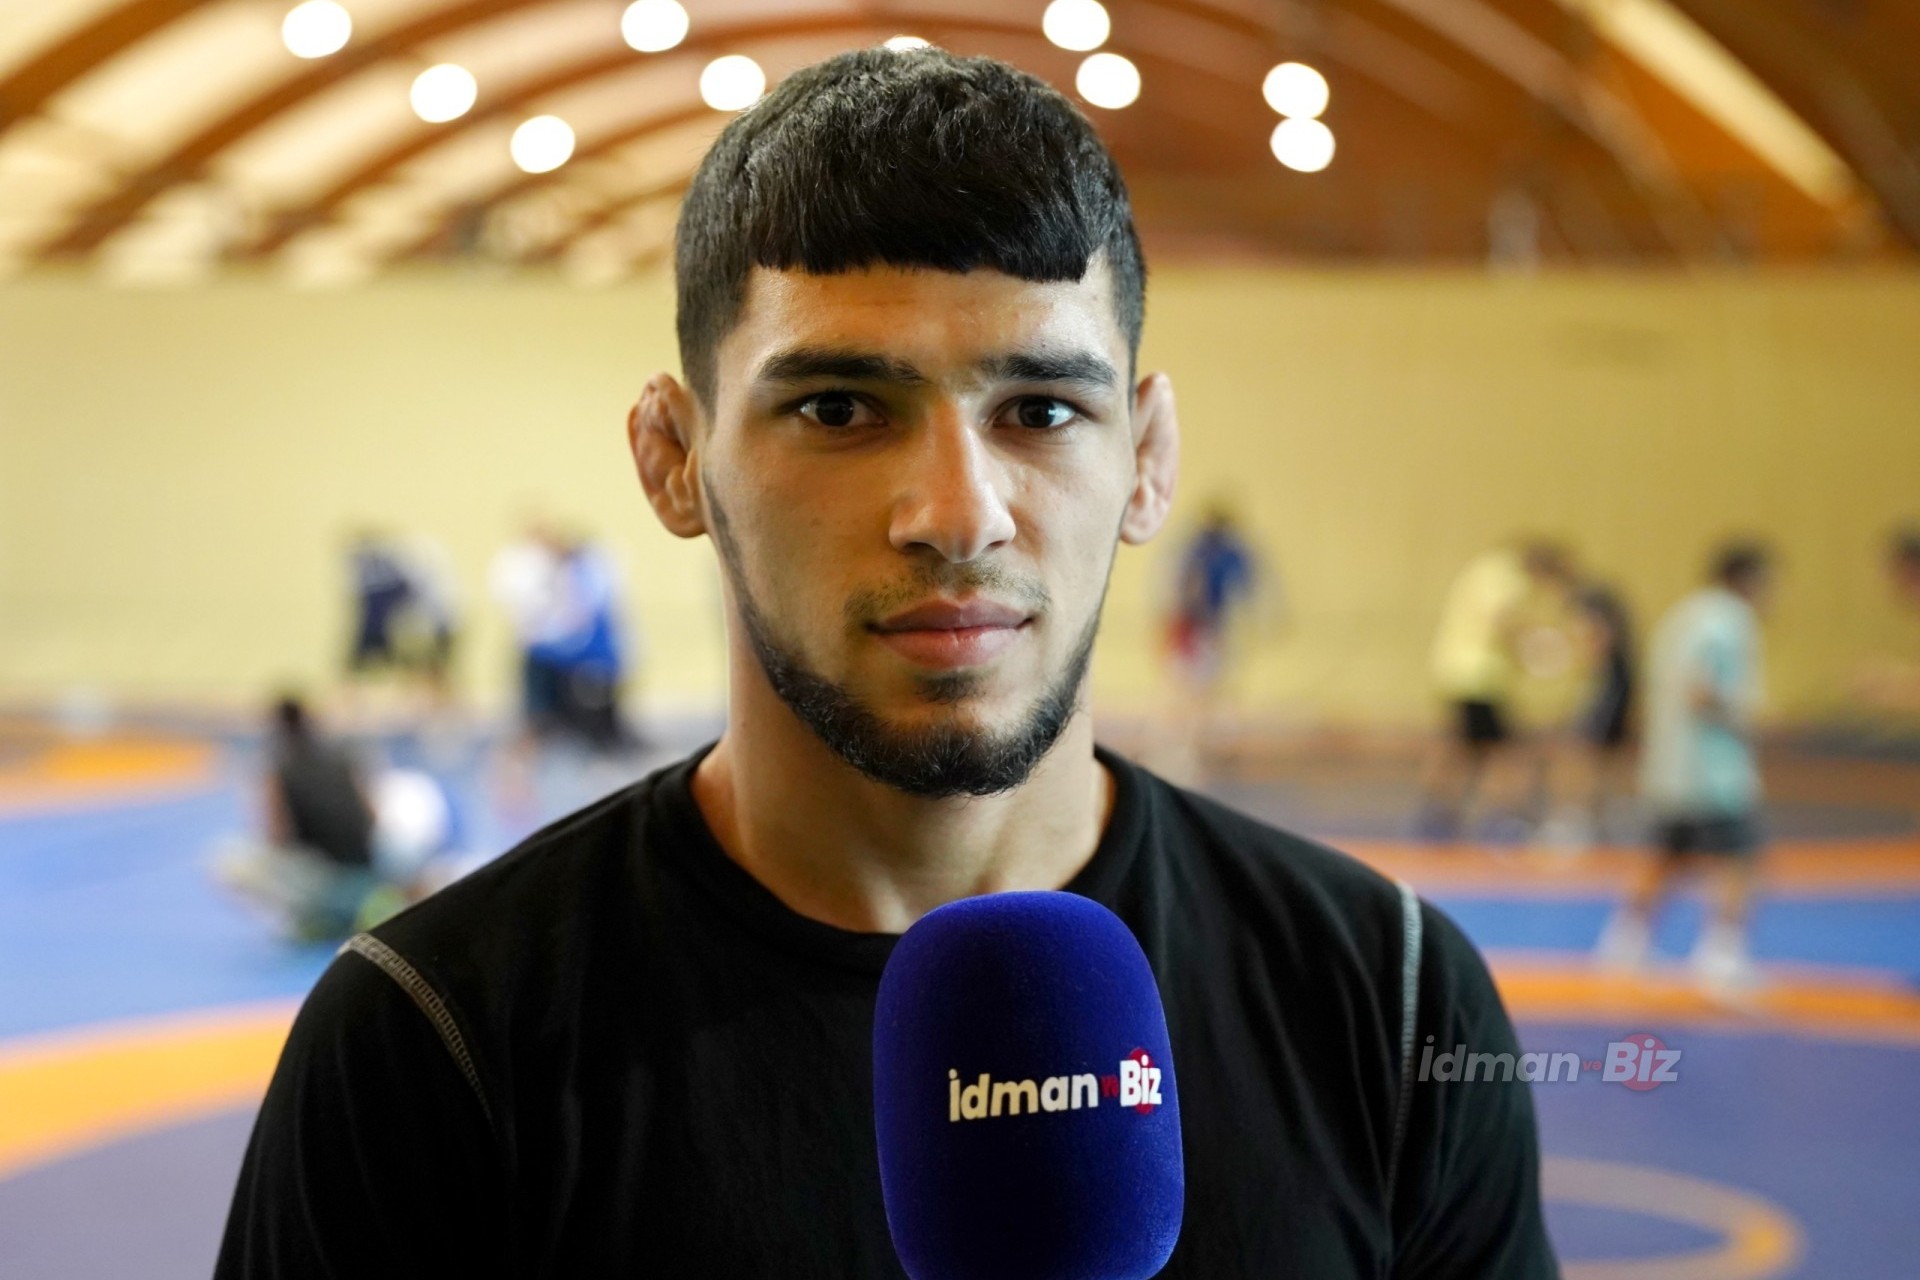 European champion of Azerbaijan appealed to the fans: "Support us, let's win a license" - VIDEO